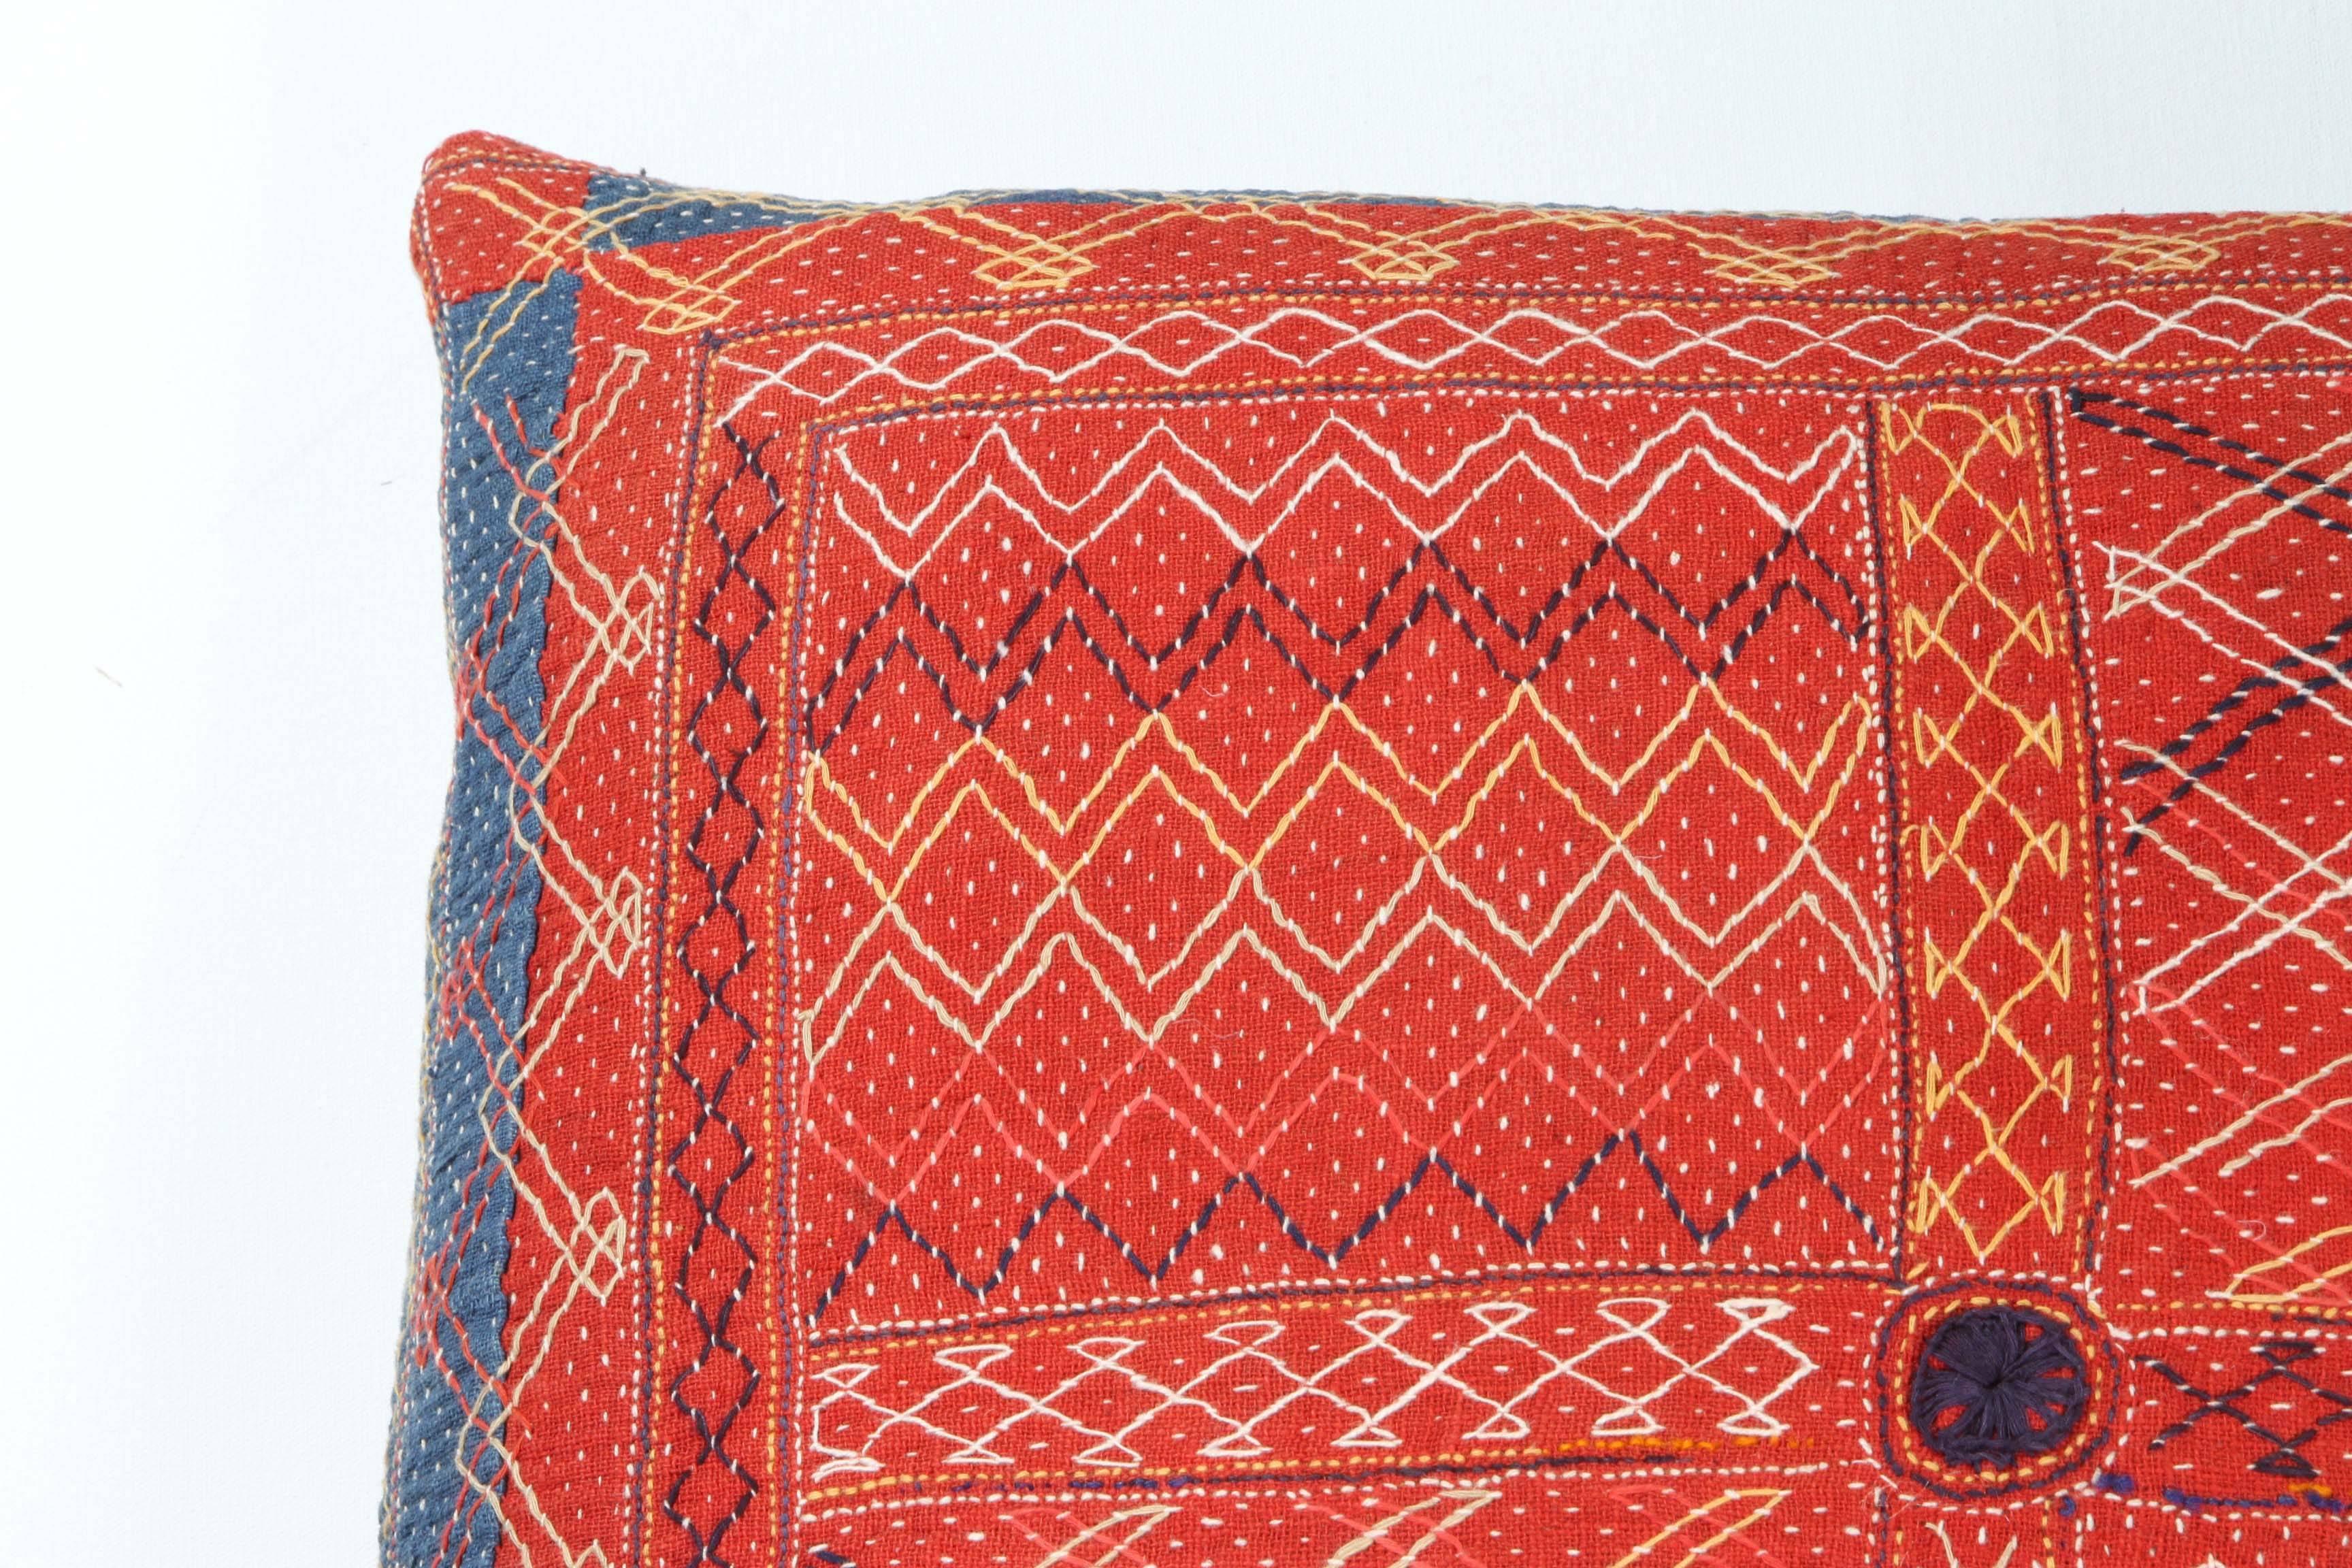 Vintage North Indian quilted storage bag made into a pillow or cushion. All-over quilting stitches on several layers of fabric. Natural linen back, invisible zipper and feather and down fill.